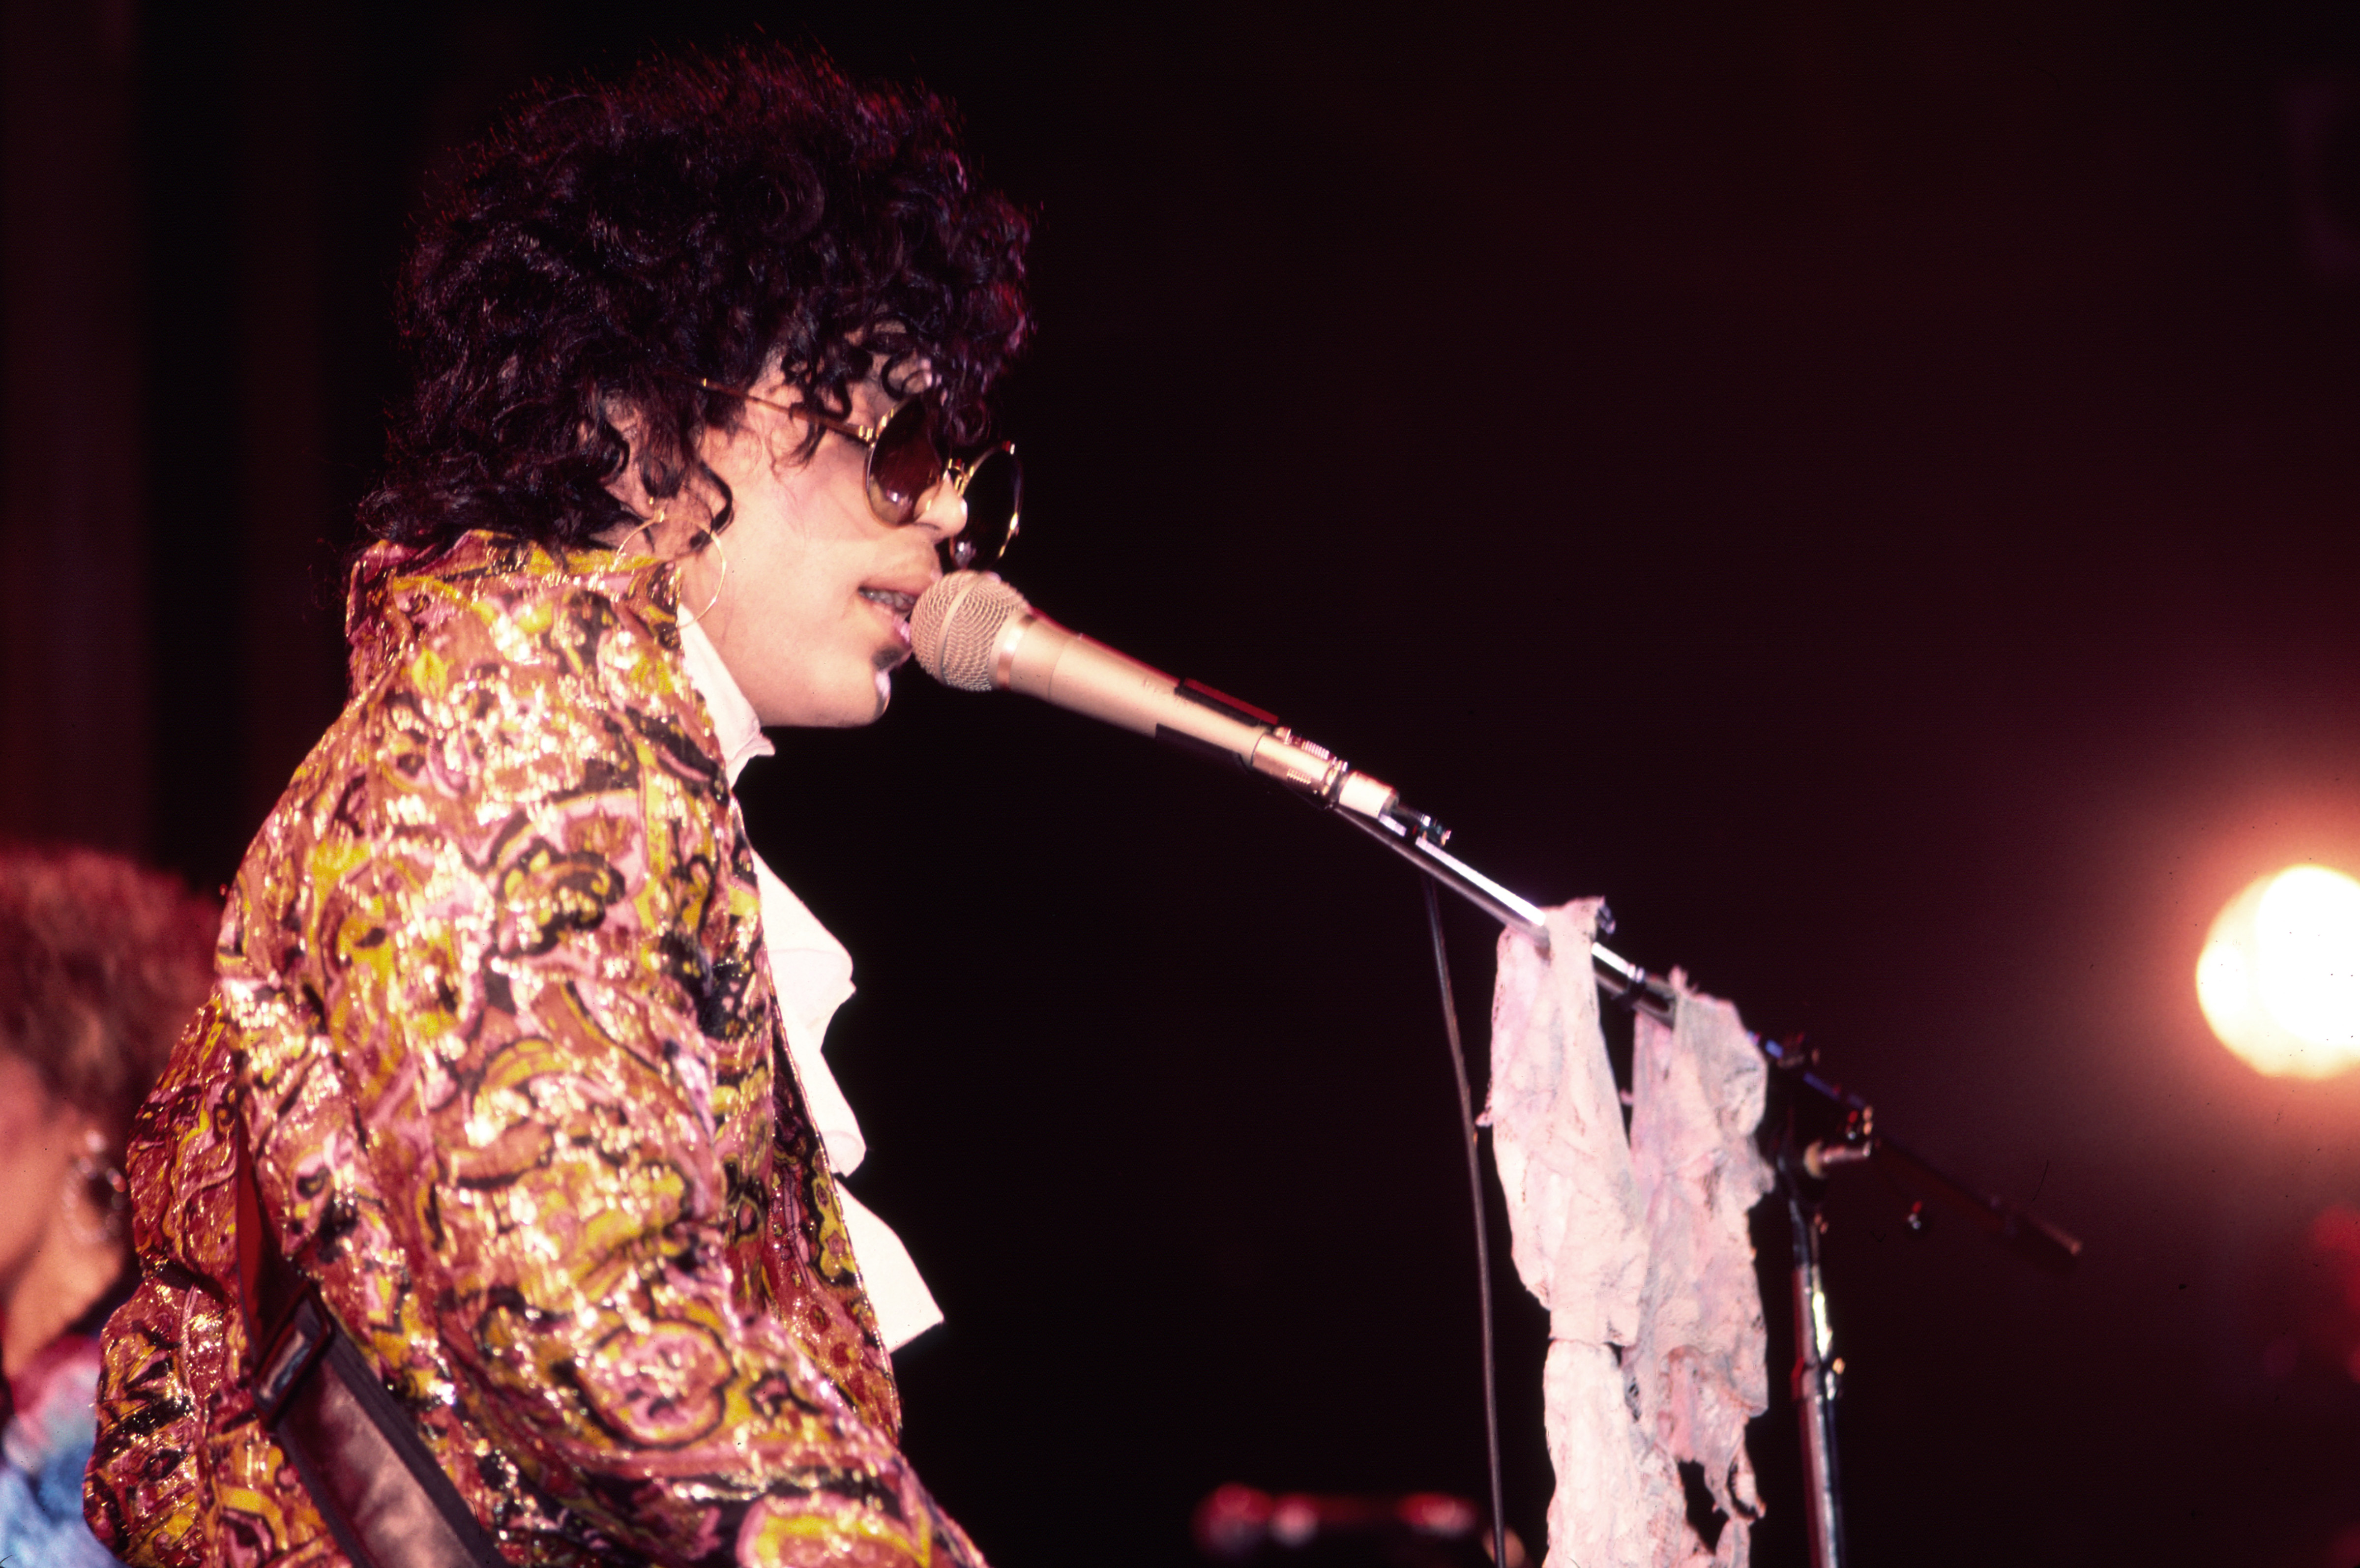 Prince performing at the Ritz club during his "Dirty Mind" tour on March 22, 1981 in New York | Source: Getty Images